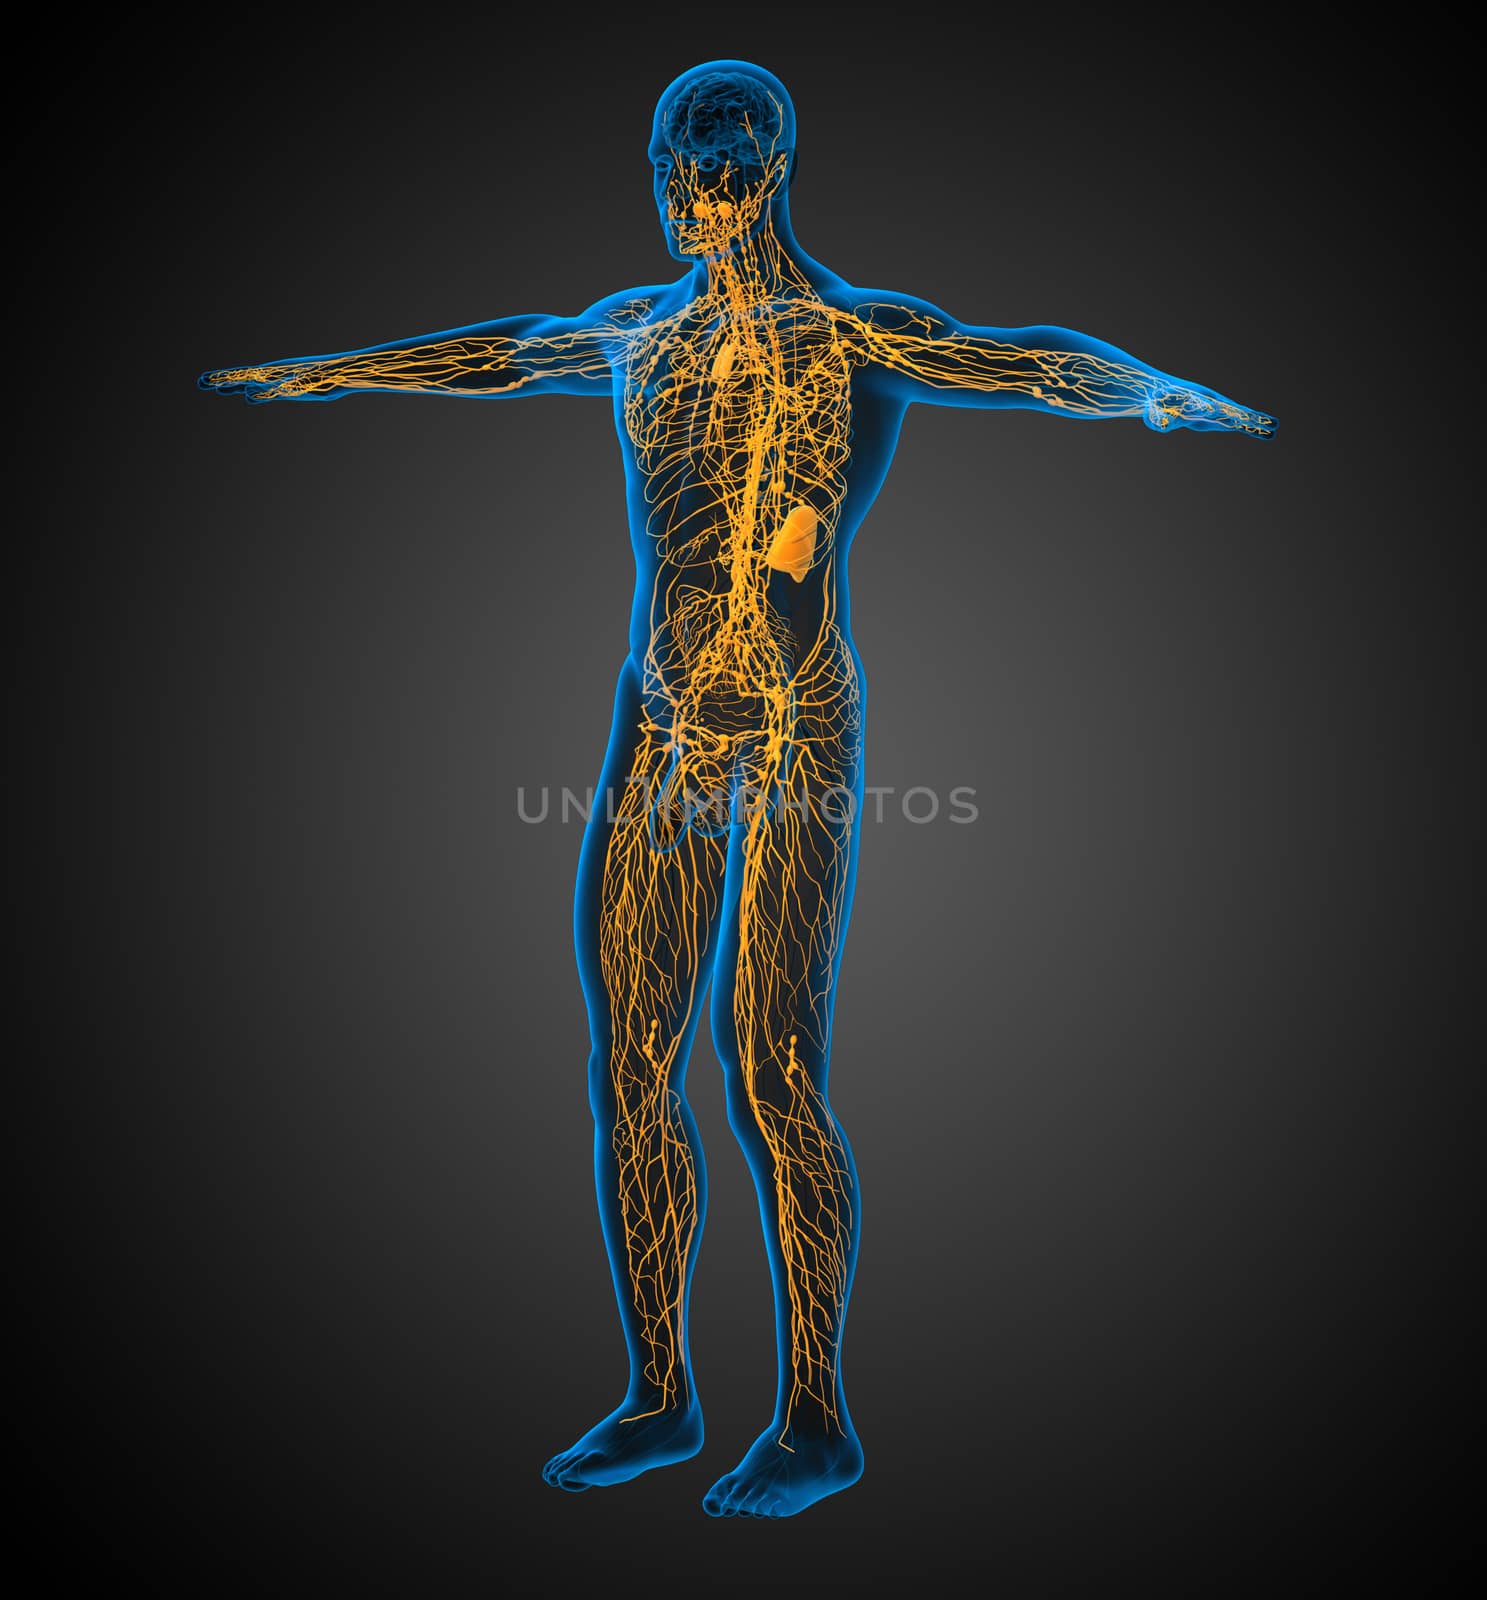 3d render medical illustration of the lymphatic system - side view